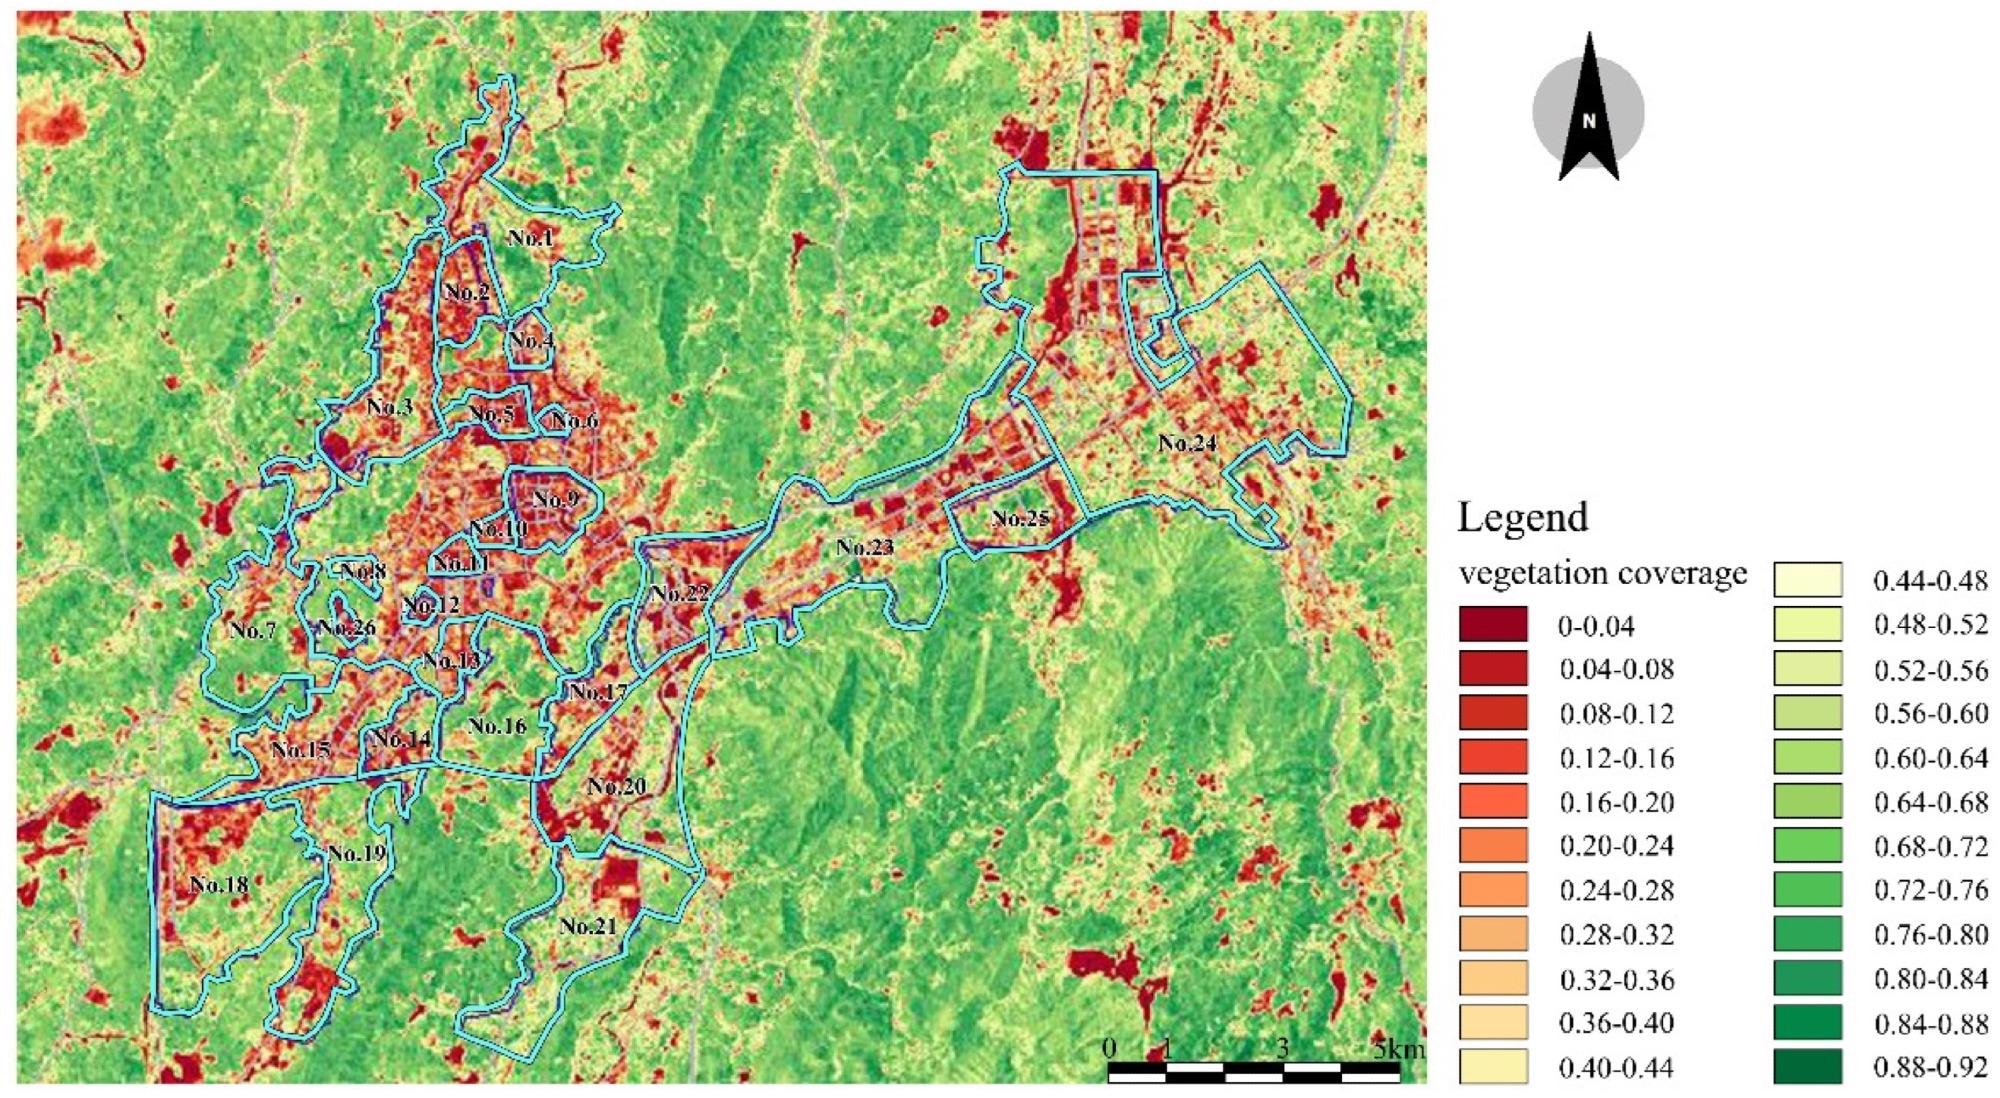 Overall map of vegetation coverage in 26 areas.